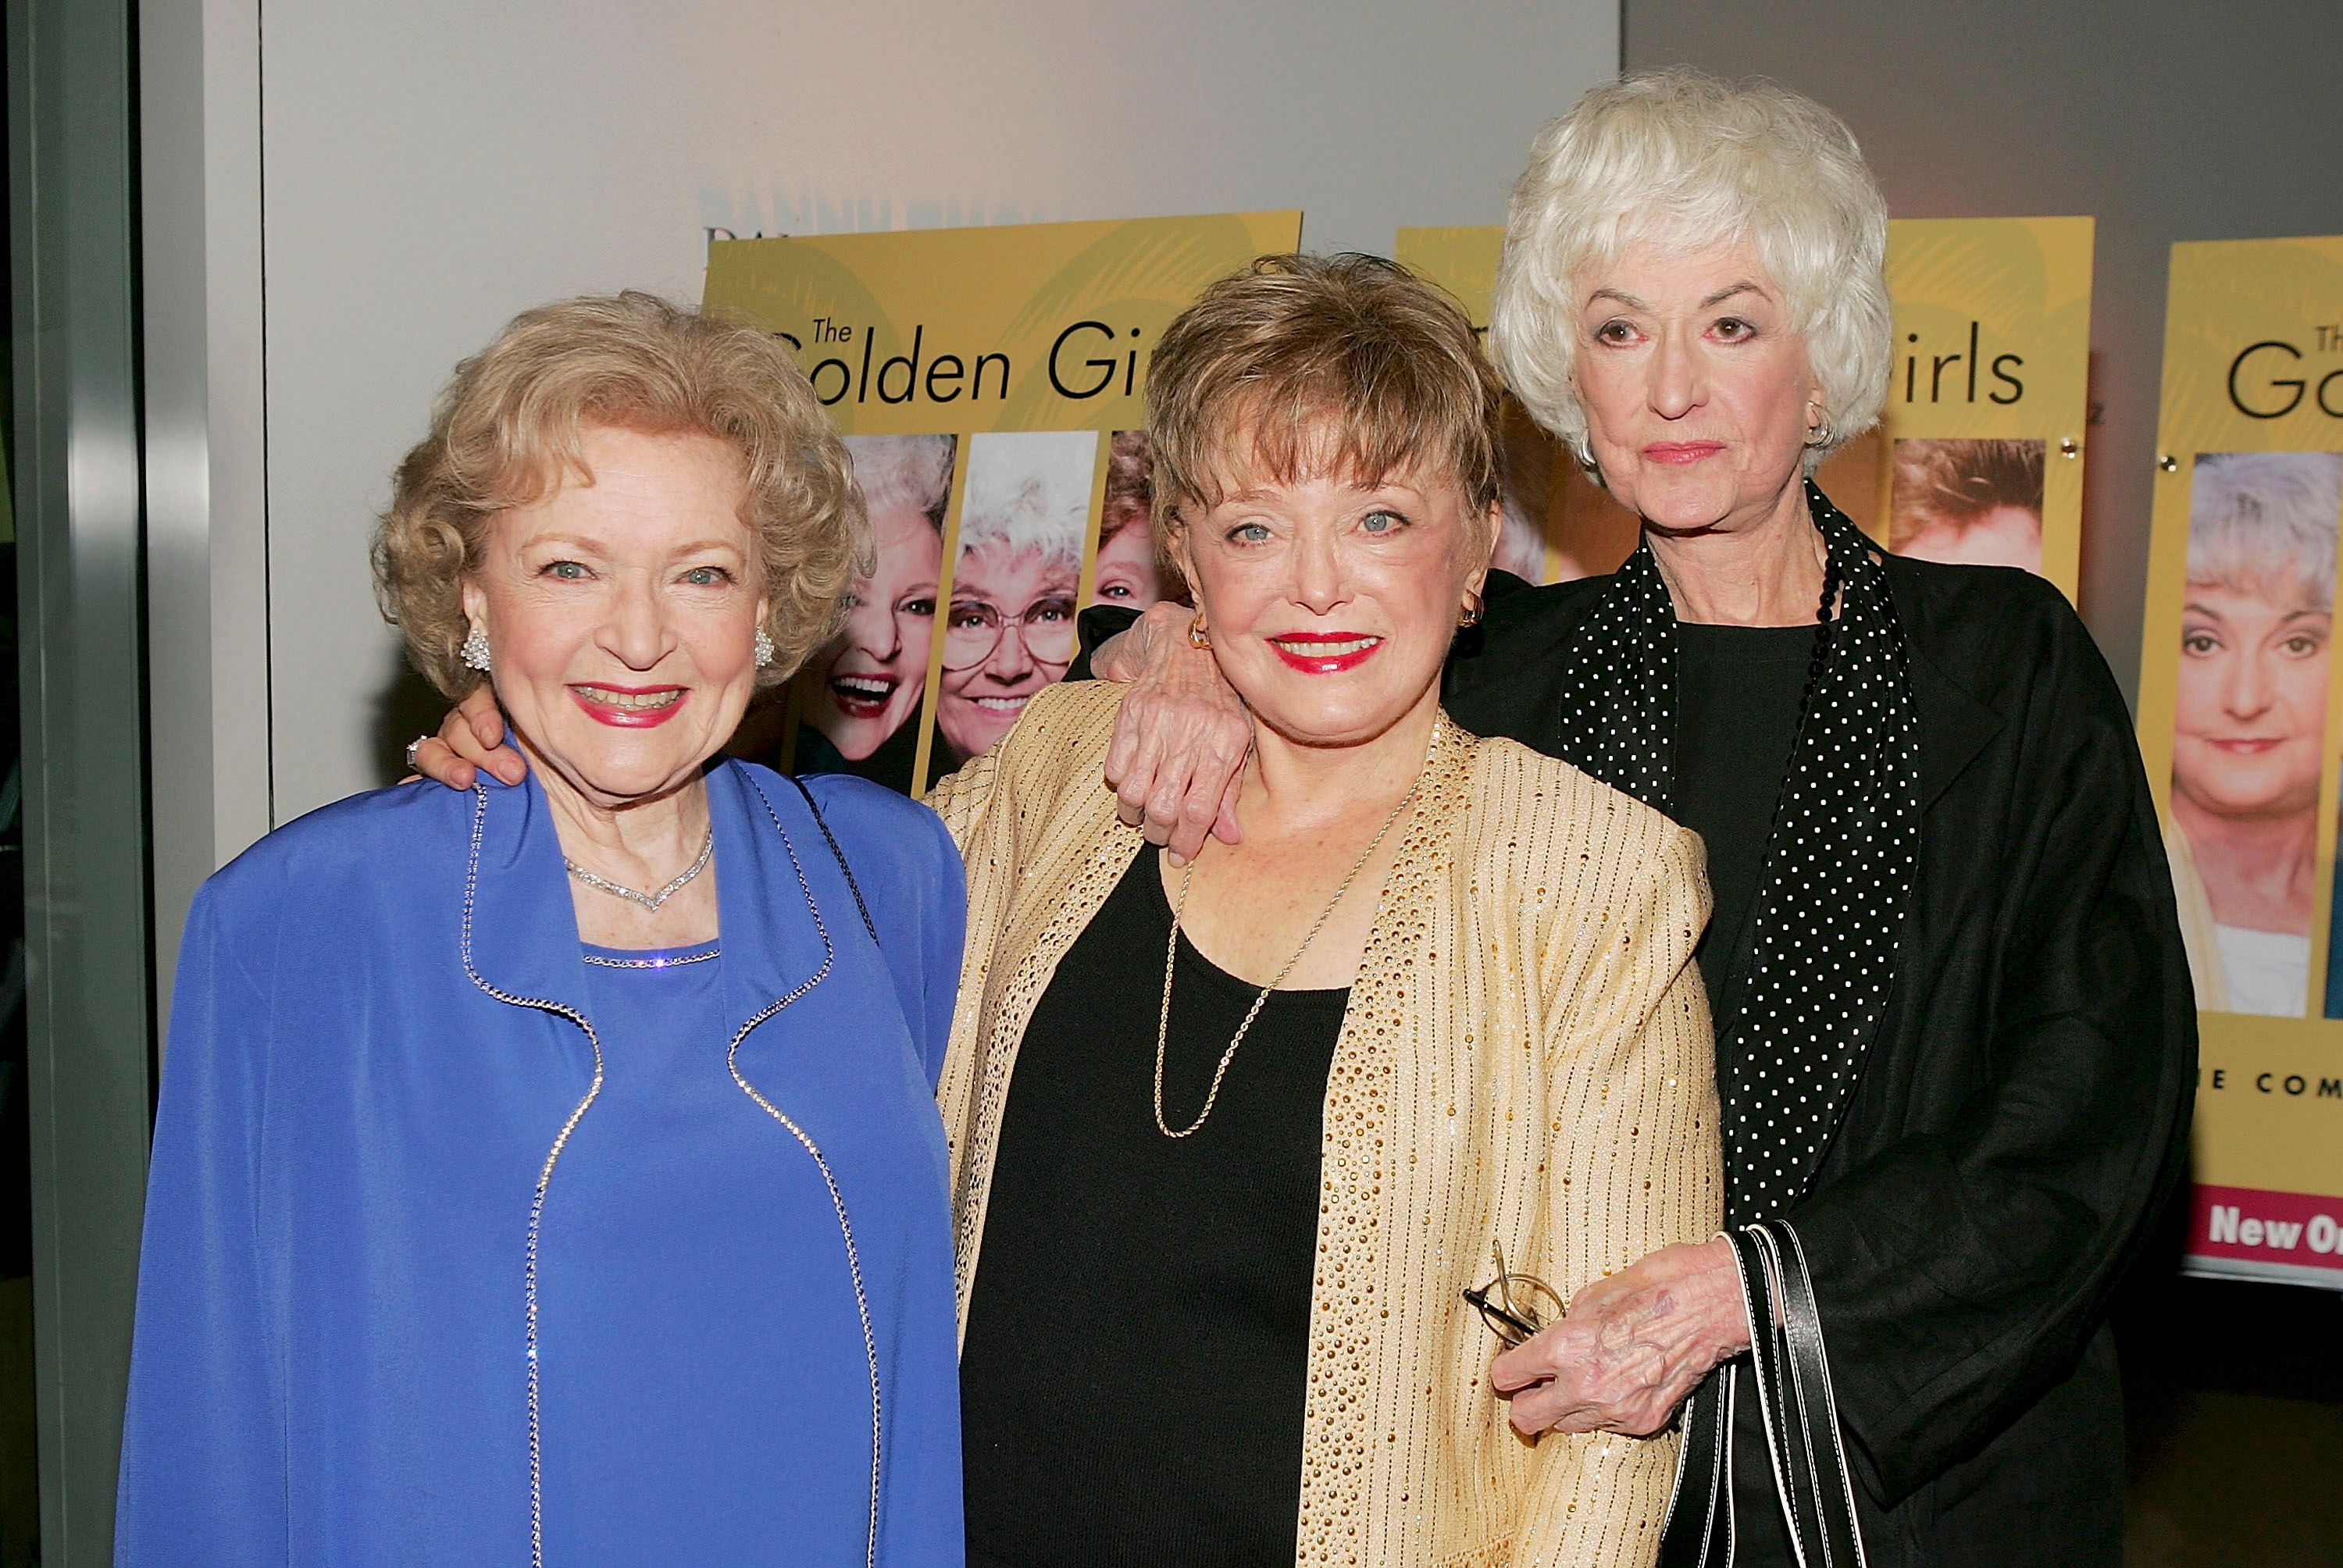 Betty White, Rue McClanahan and Bea Arthur at the DVD release party for "The Golden Girls" in 2004 in Los Angeles | Source: Getty Images